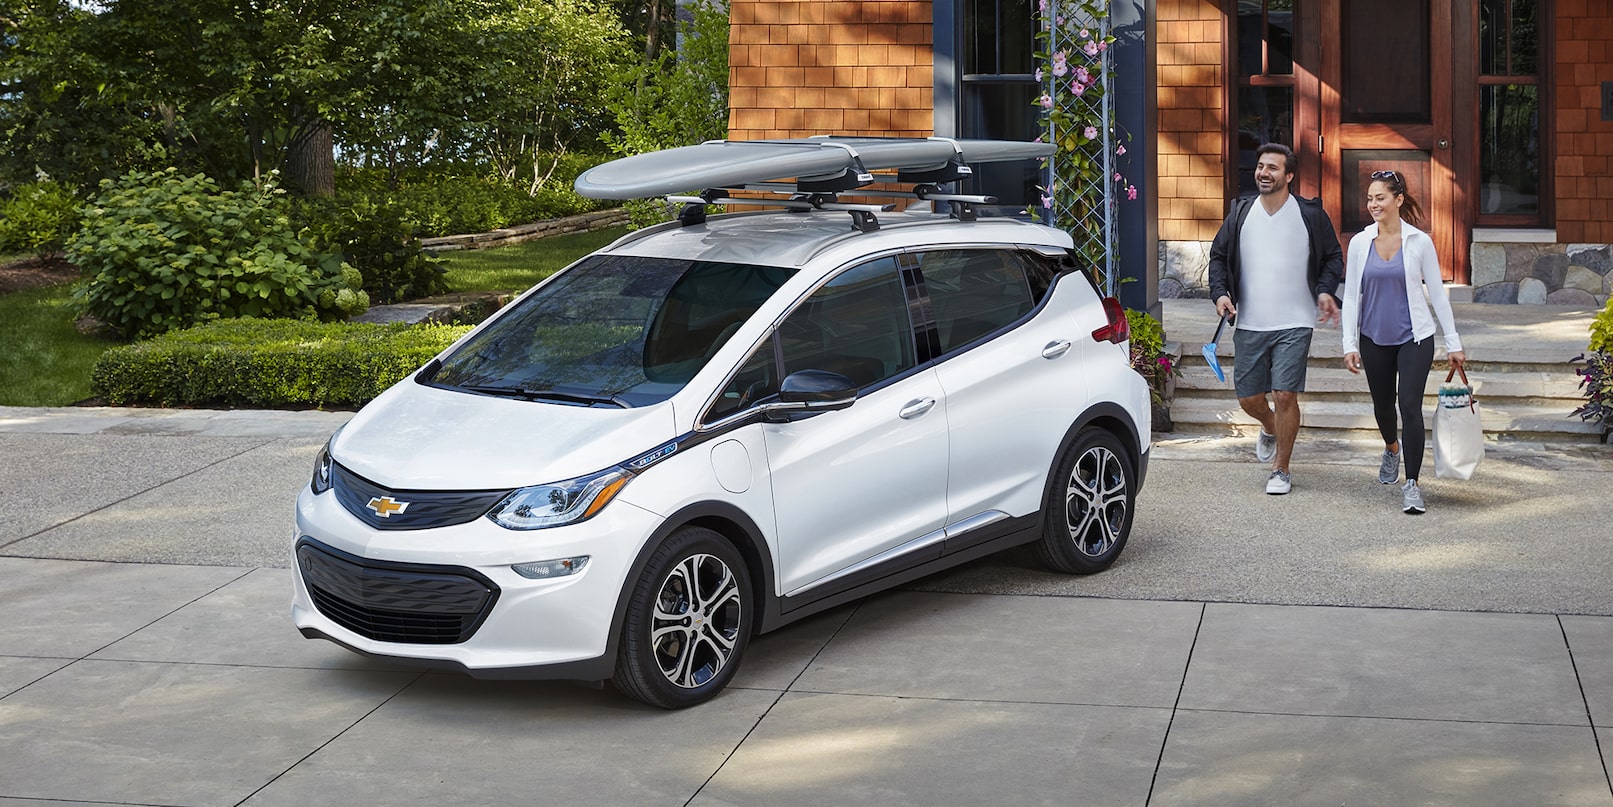 2023 Chevy Bolt EV Price | Chevy Bolt Price List & Packages